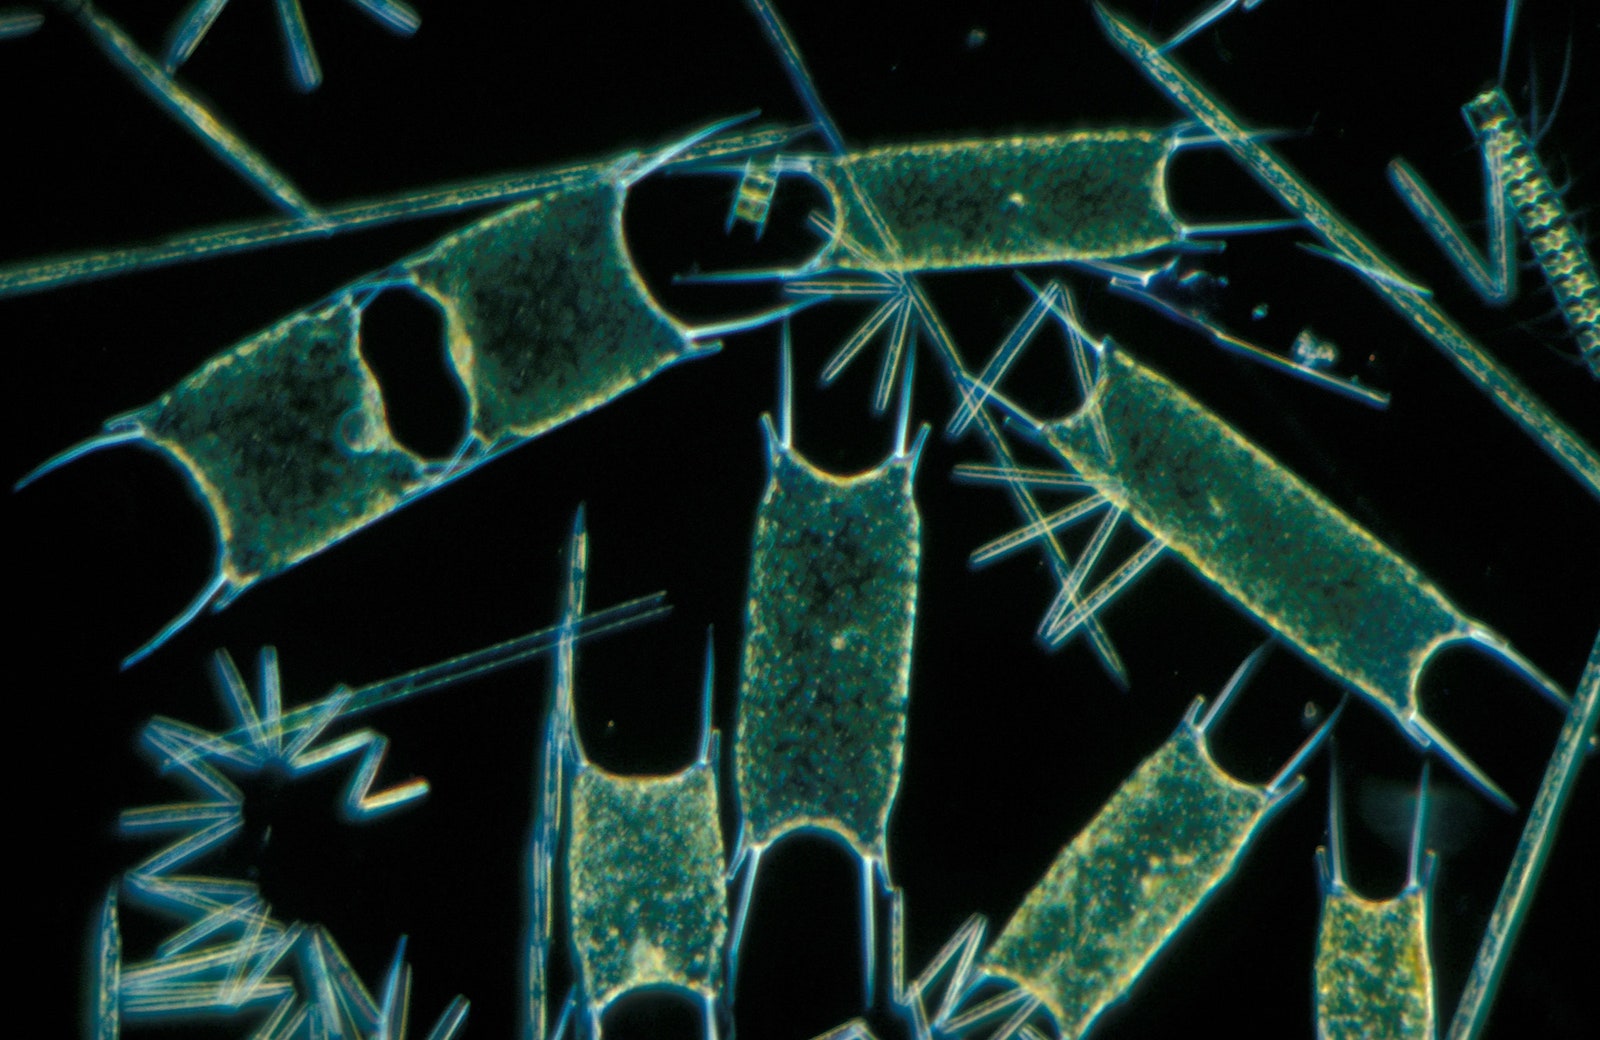 Microscopic photo of green phytoplankton on a black background